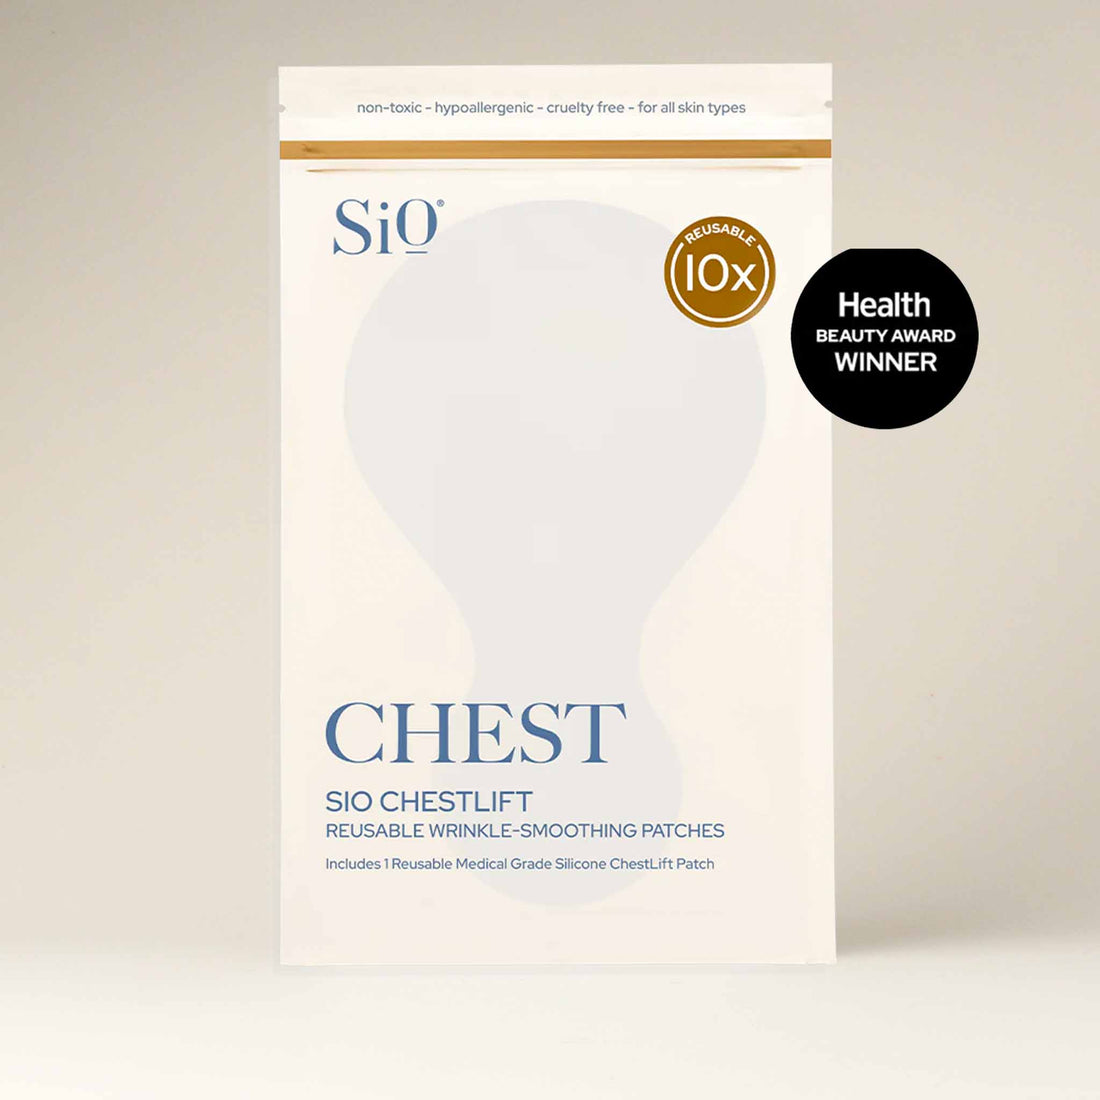 ChestLift Reusable Wrinkle-Smoothing Patch